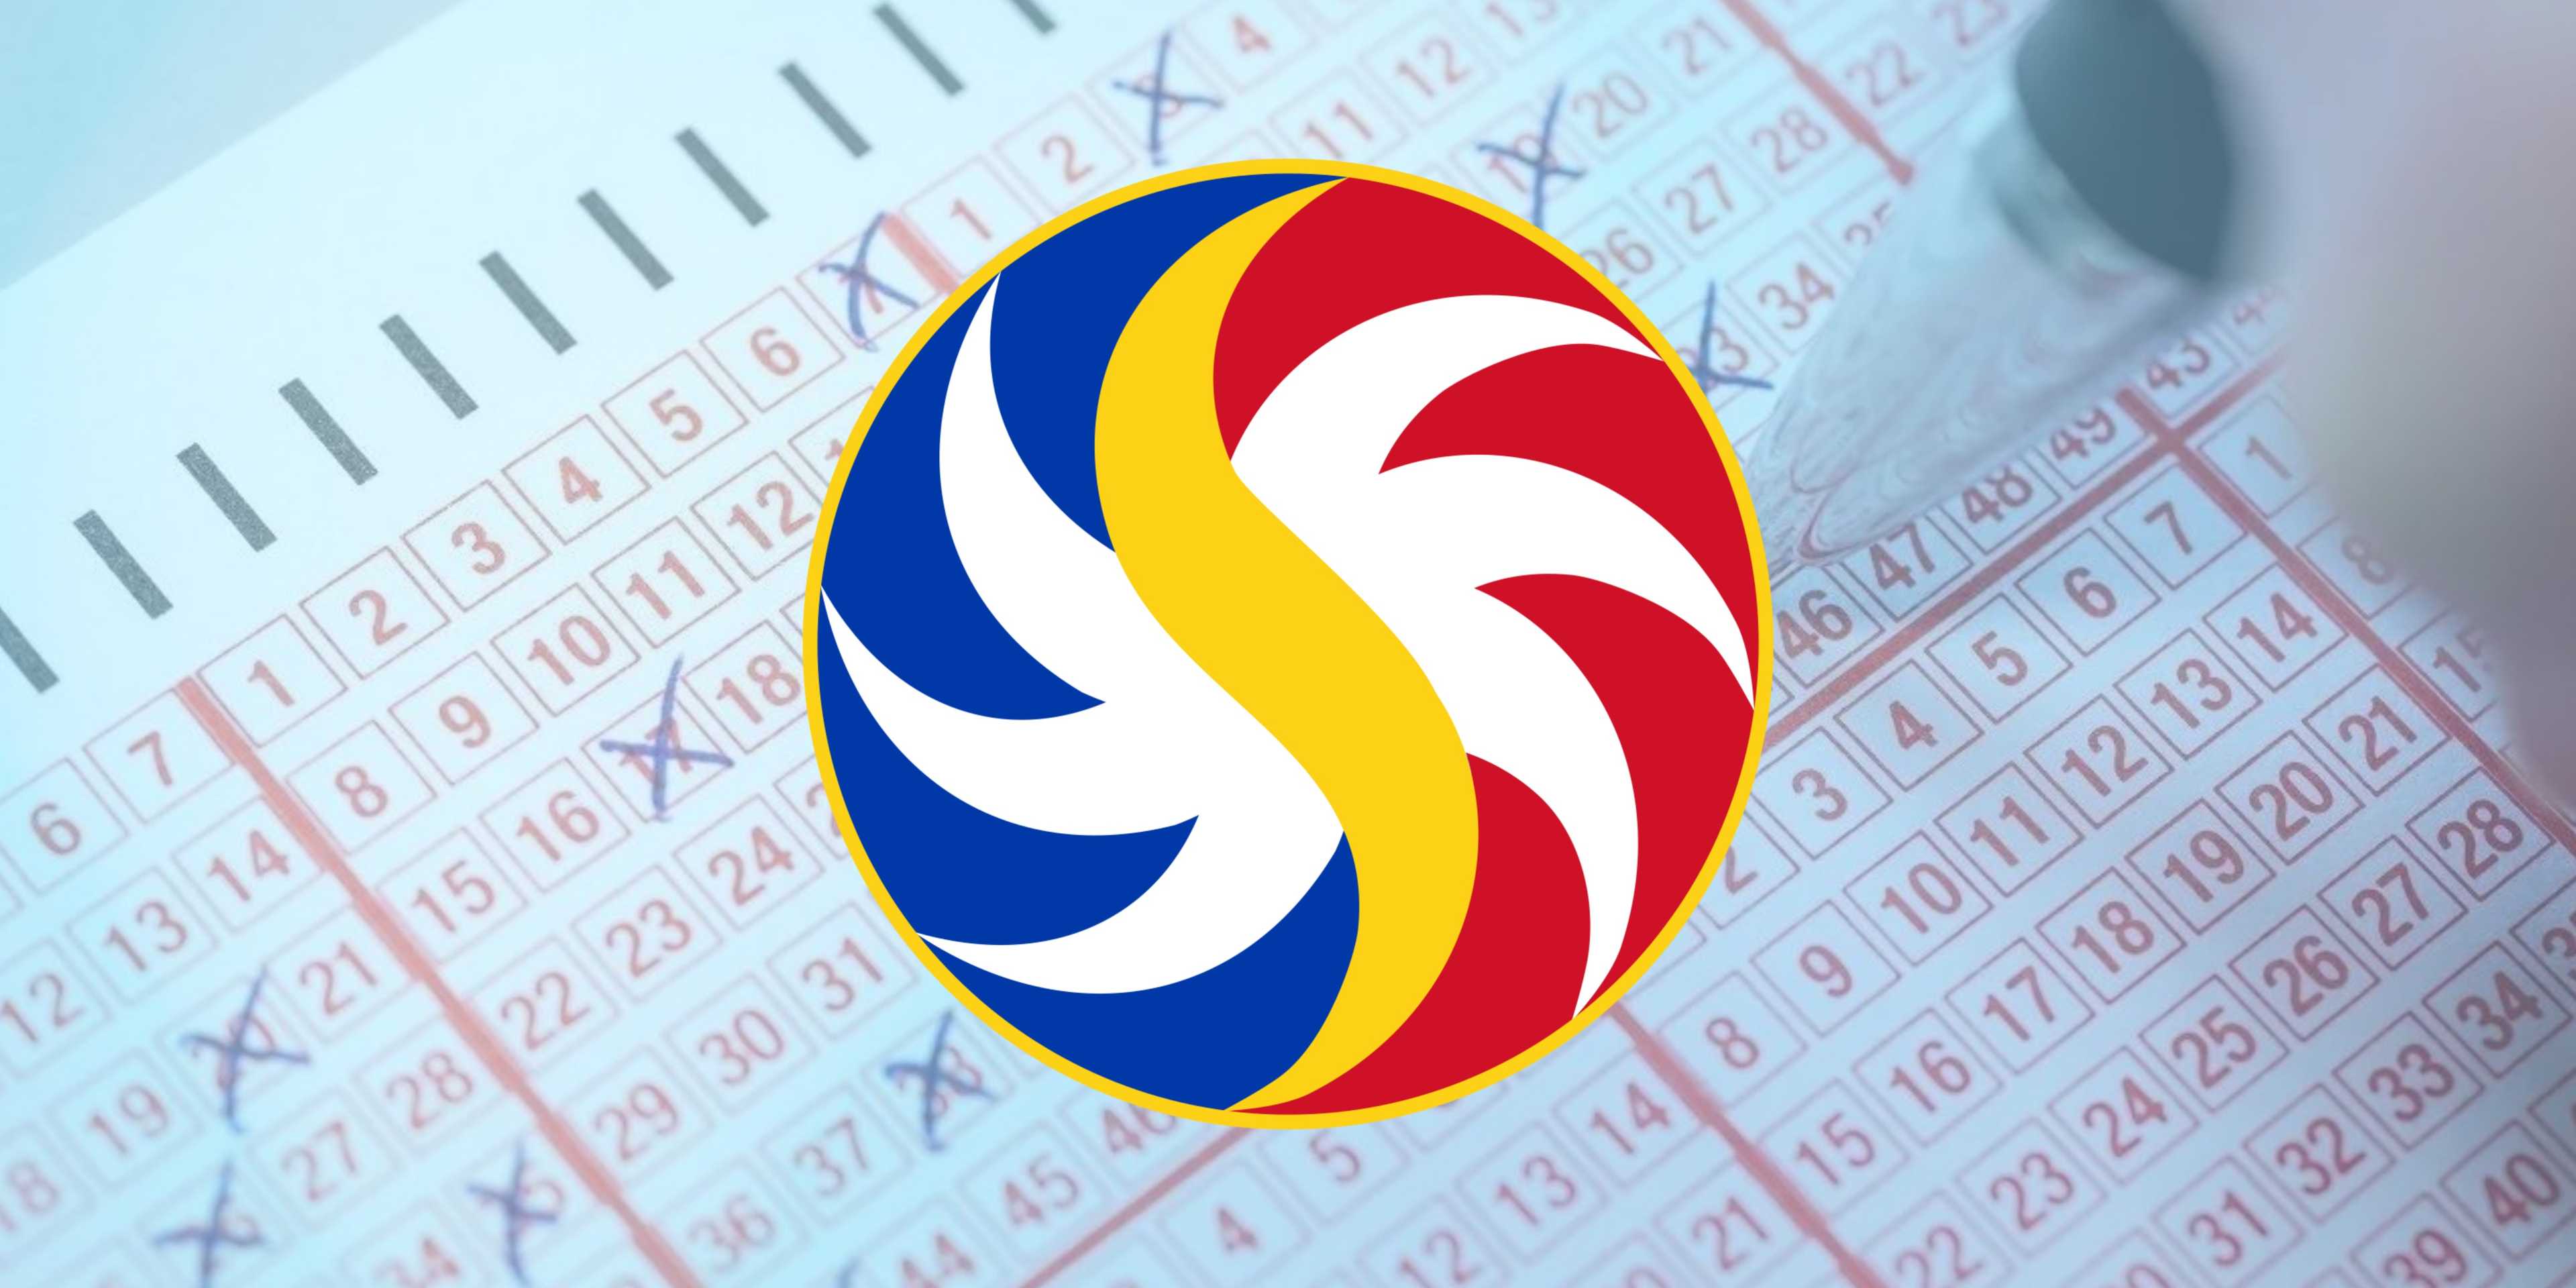 PCSO Lotto Draw Results on Wednesday, January 24